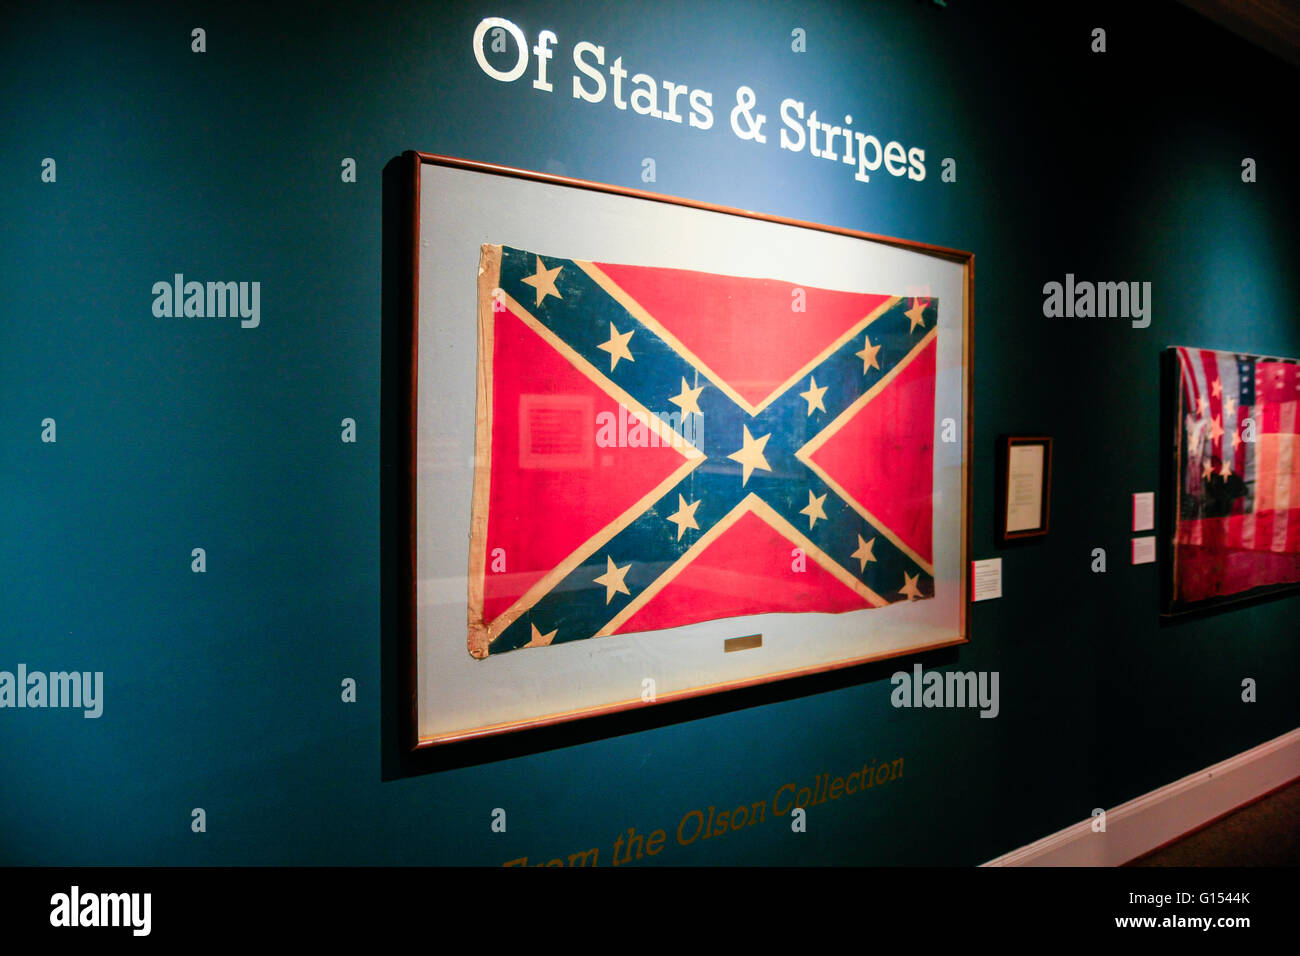 Confederate Battle flag recovered from the Gettysburg battlefield on July 3, 1863 on display at the Clarksville museum TN Stock Photo